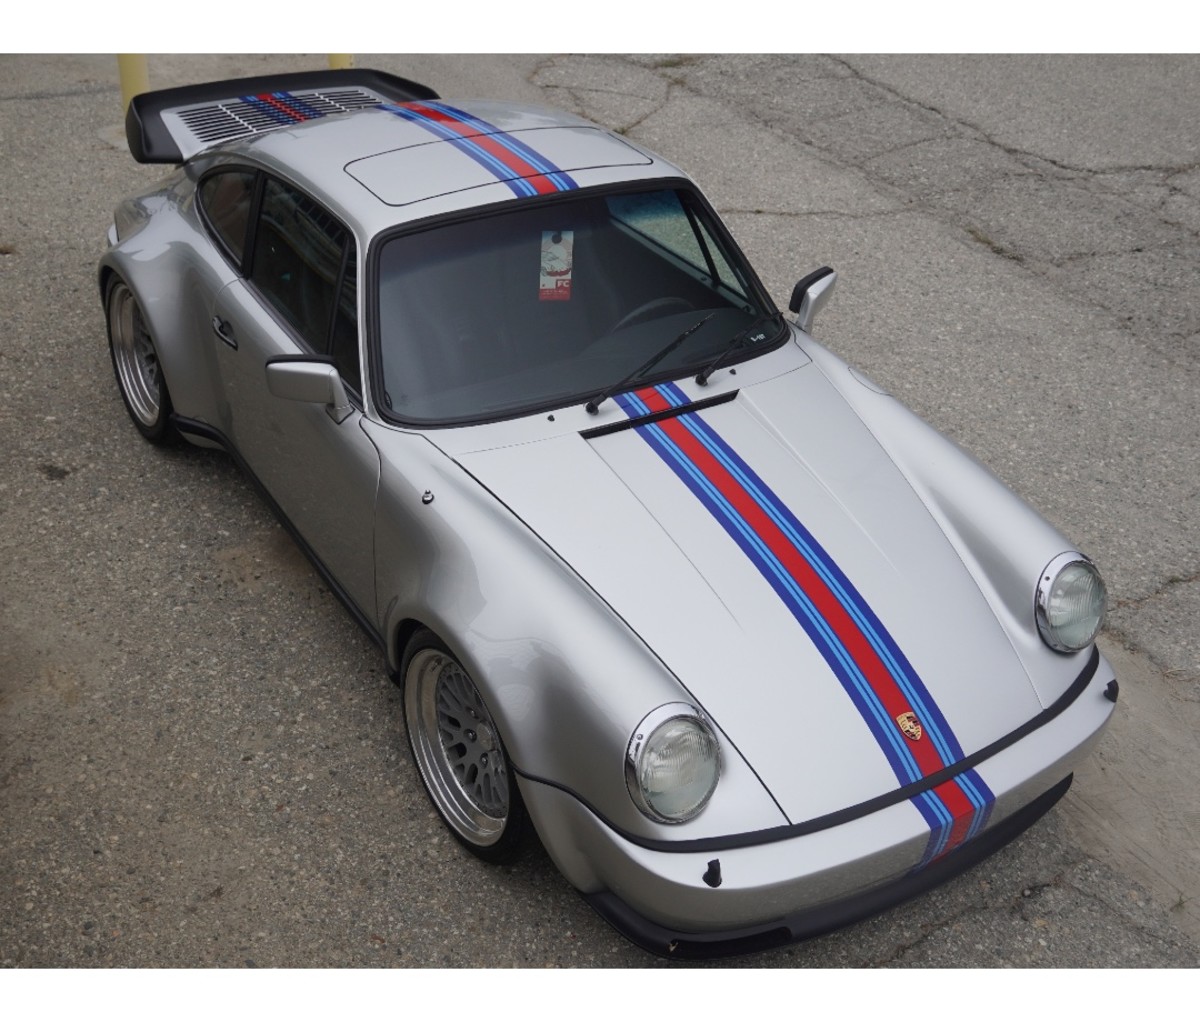 At the Luftgekuhlt, vintage air-cooled Porsches ruled the day.